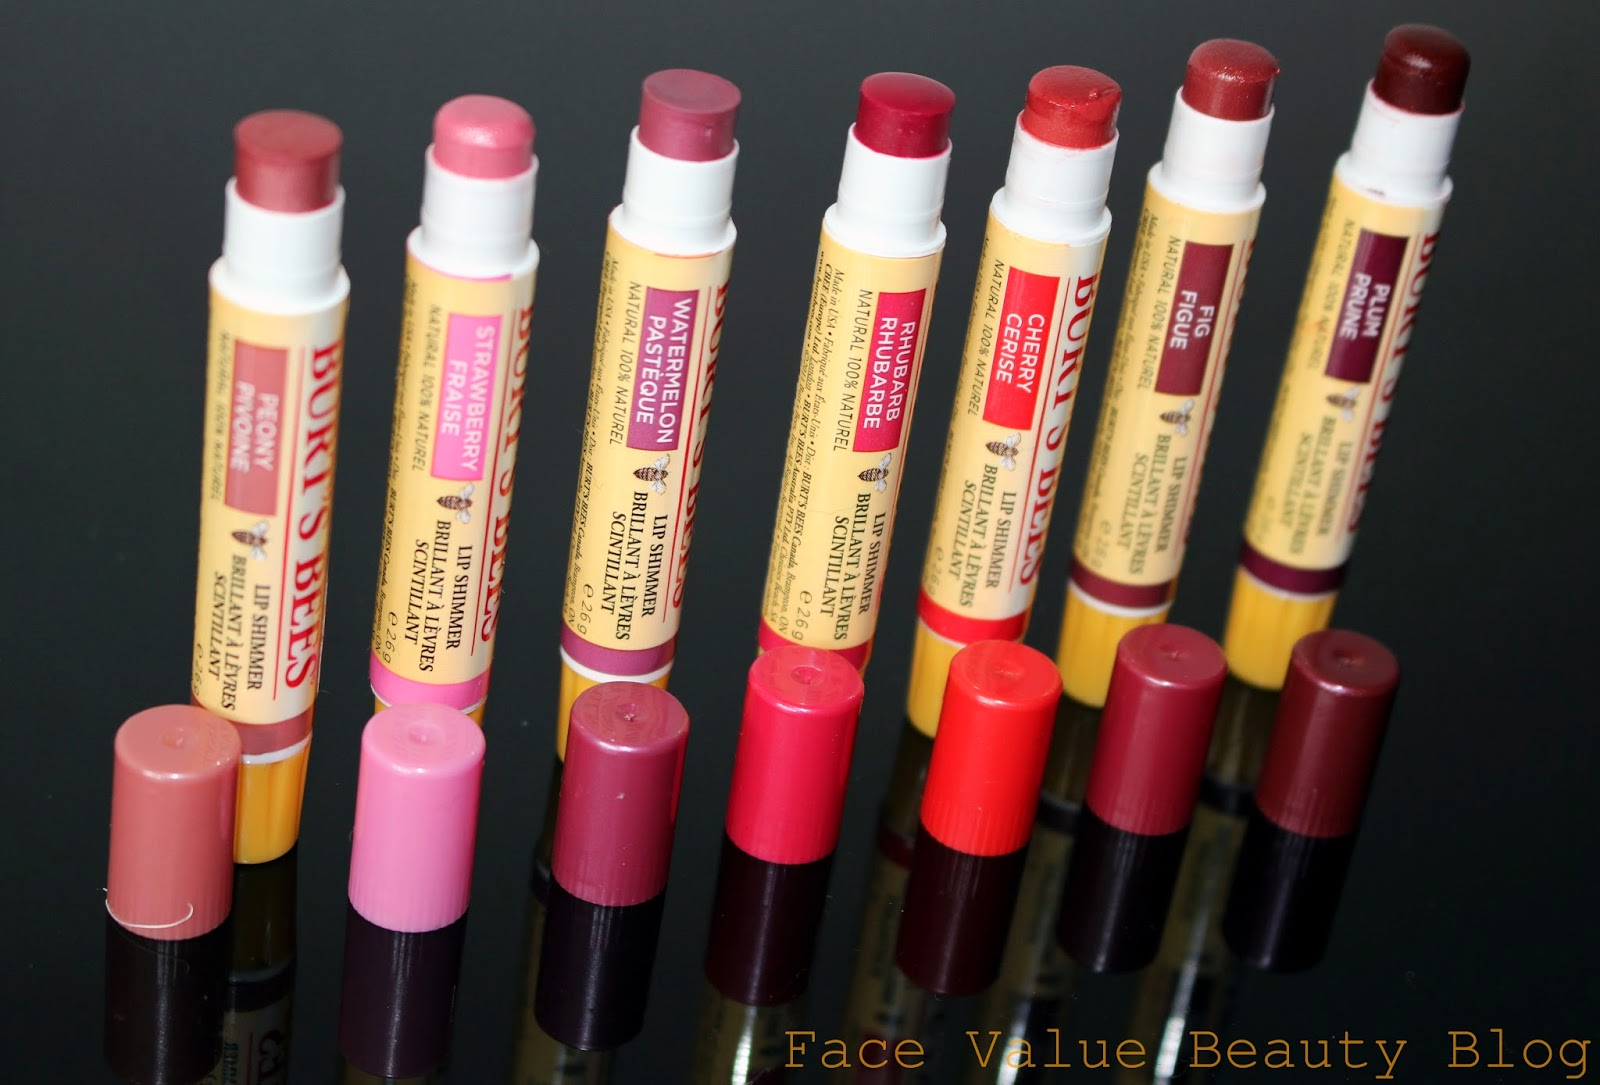 if you don't want color, their lip balm is great, if you want some col...